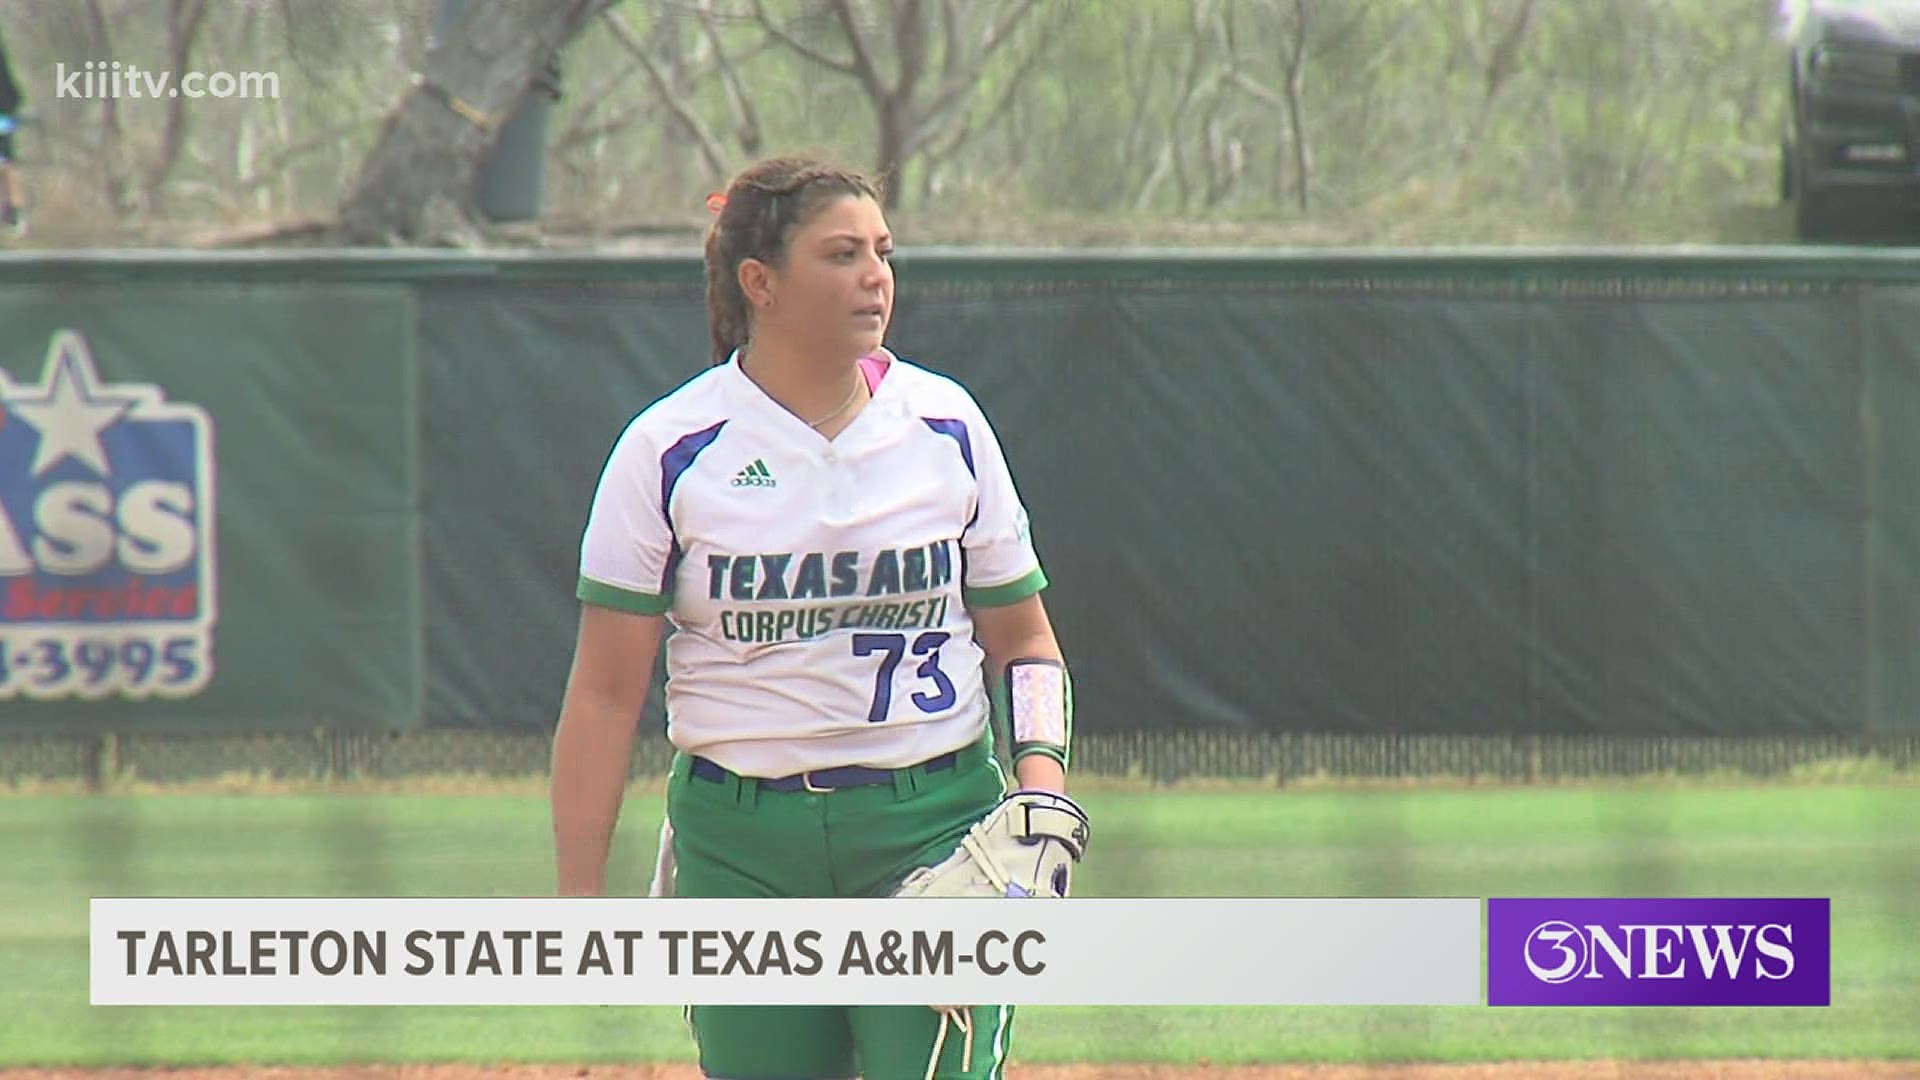 Texas A&M-Corpus Christi has now shut out five straight opponents.